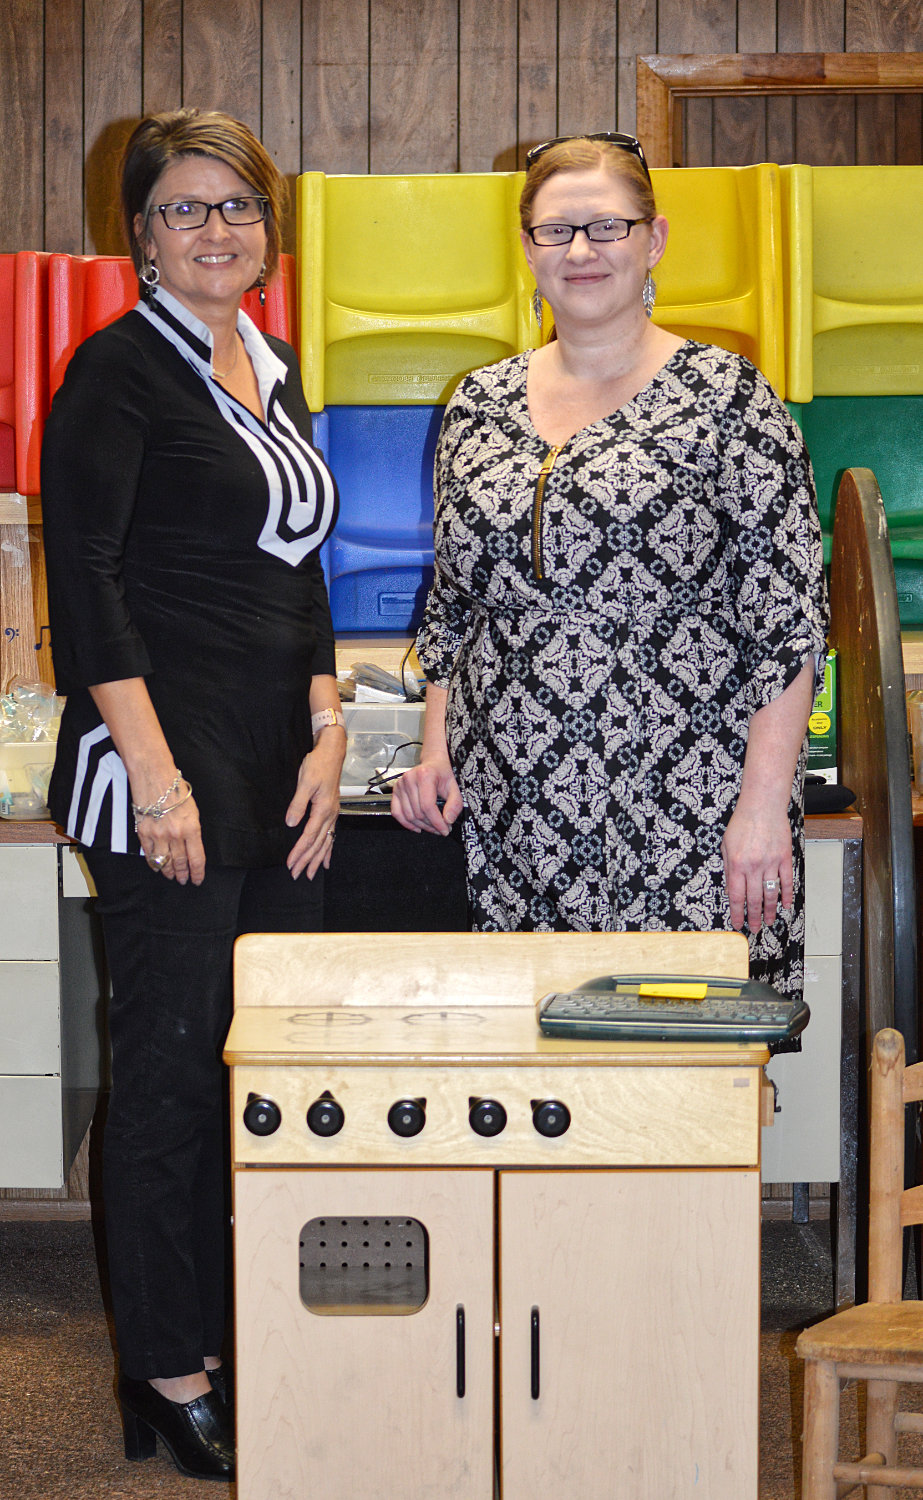 Dr. Tammy Willis, director of special education, and Dr. Rebecca Roos, assistant director of special education, are looking forward to providing students with much needed technology through the money generated from the upcoming garage sale.